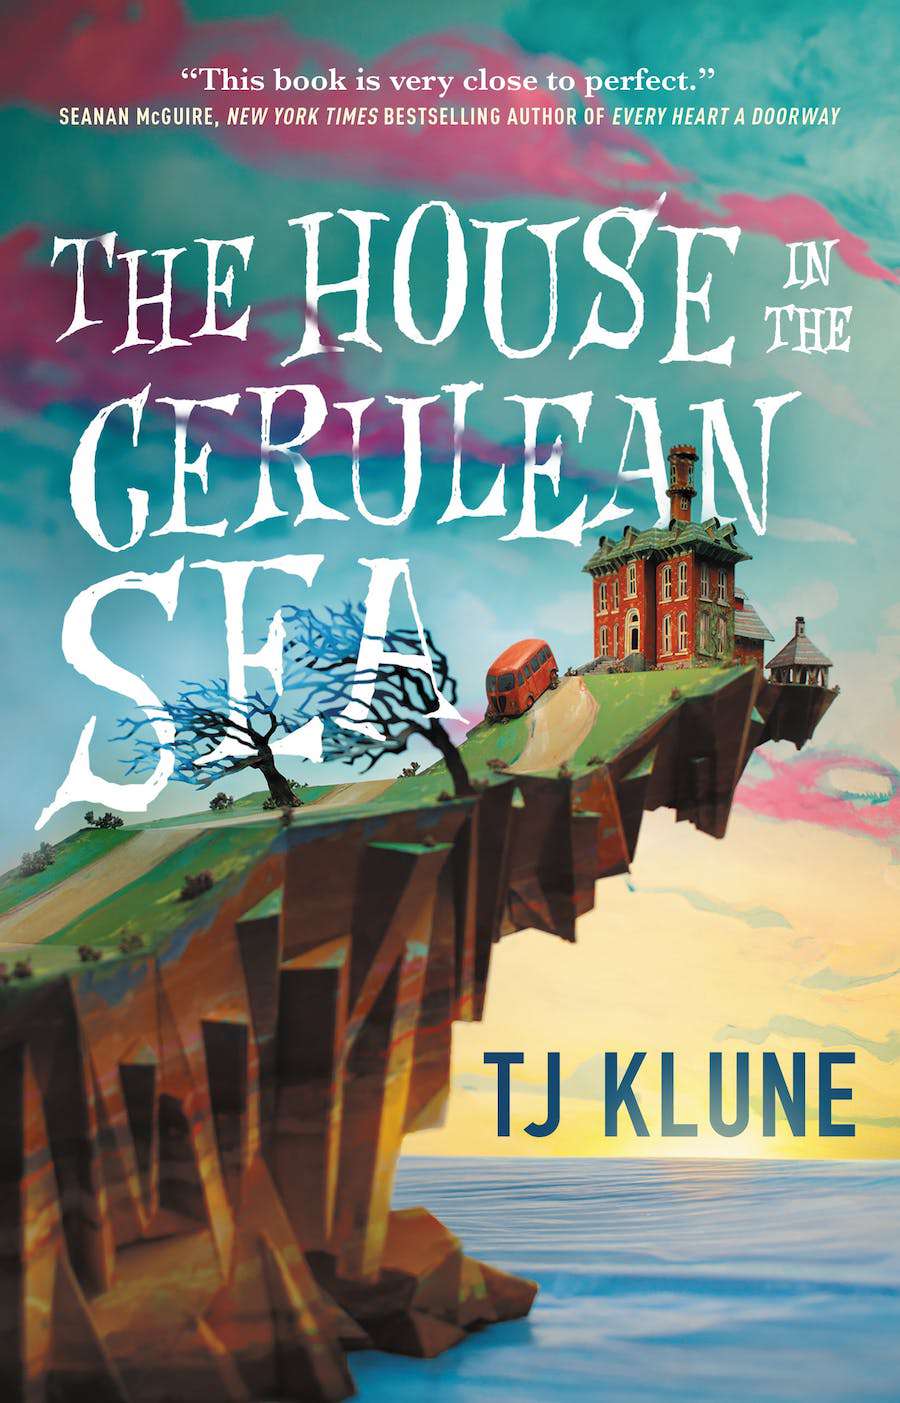 The House in the Cerulean Sea Book Cover